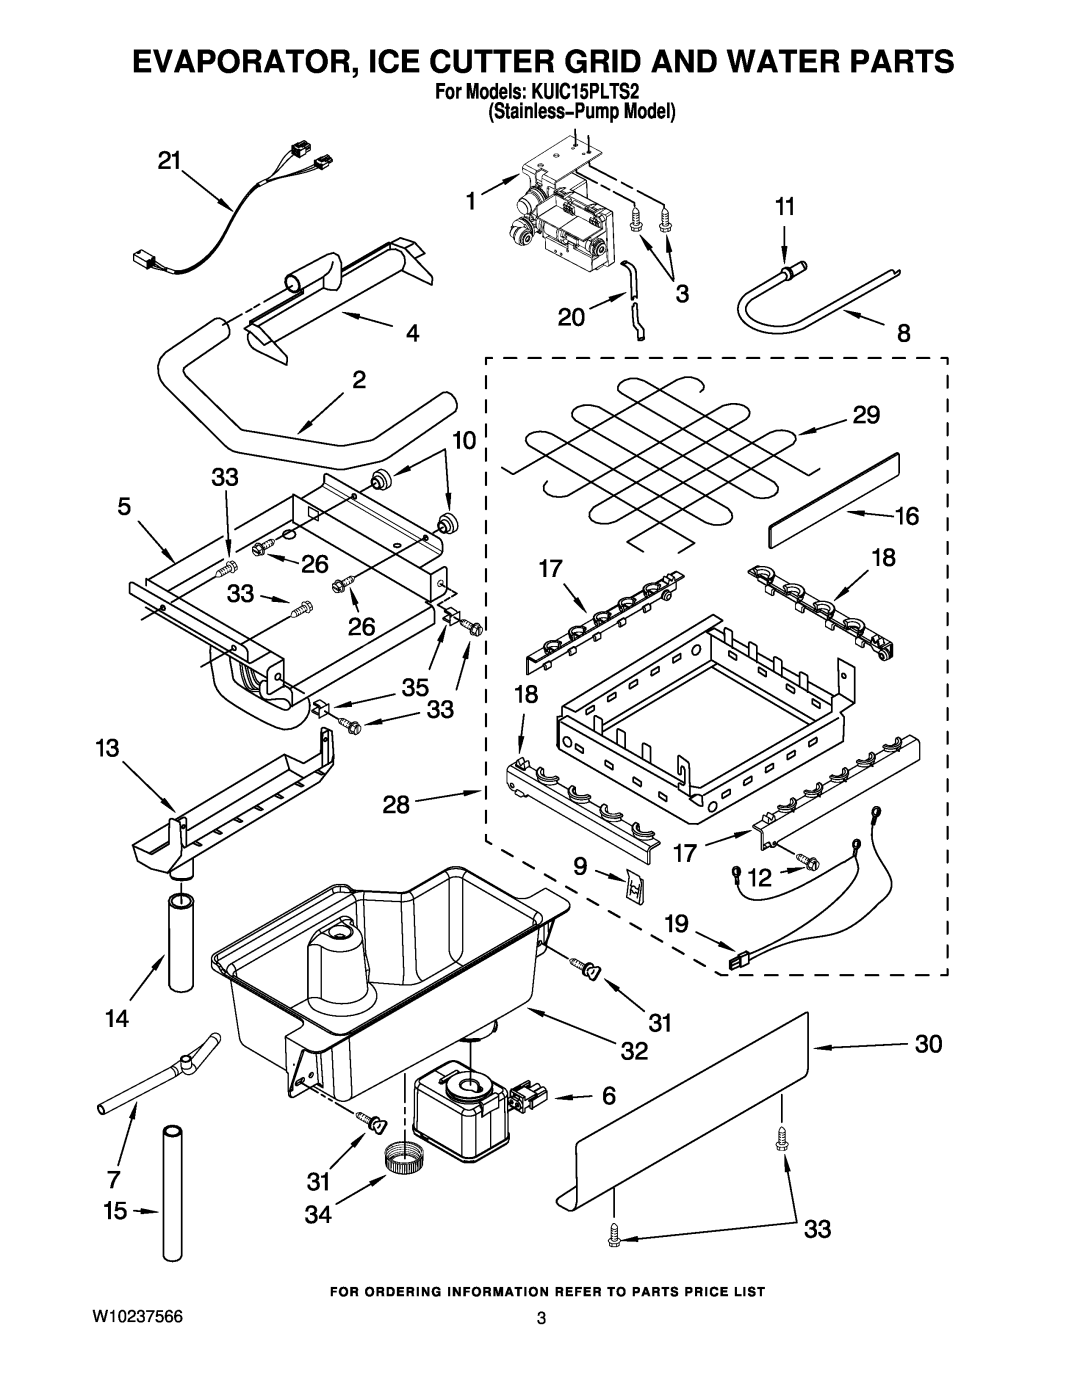 KitchenAid manual Evaporator, Ice Cutter Grid And Water Parts, W10237566, For Models KUIC15PLTS2 Stainless−Pump Model 